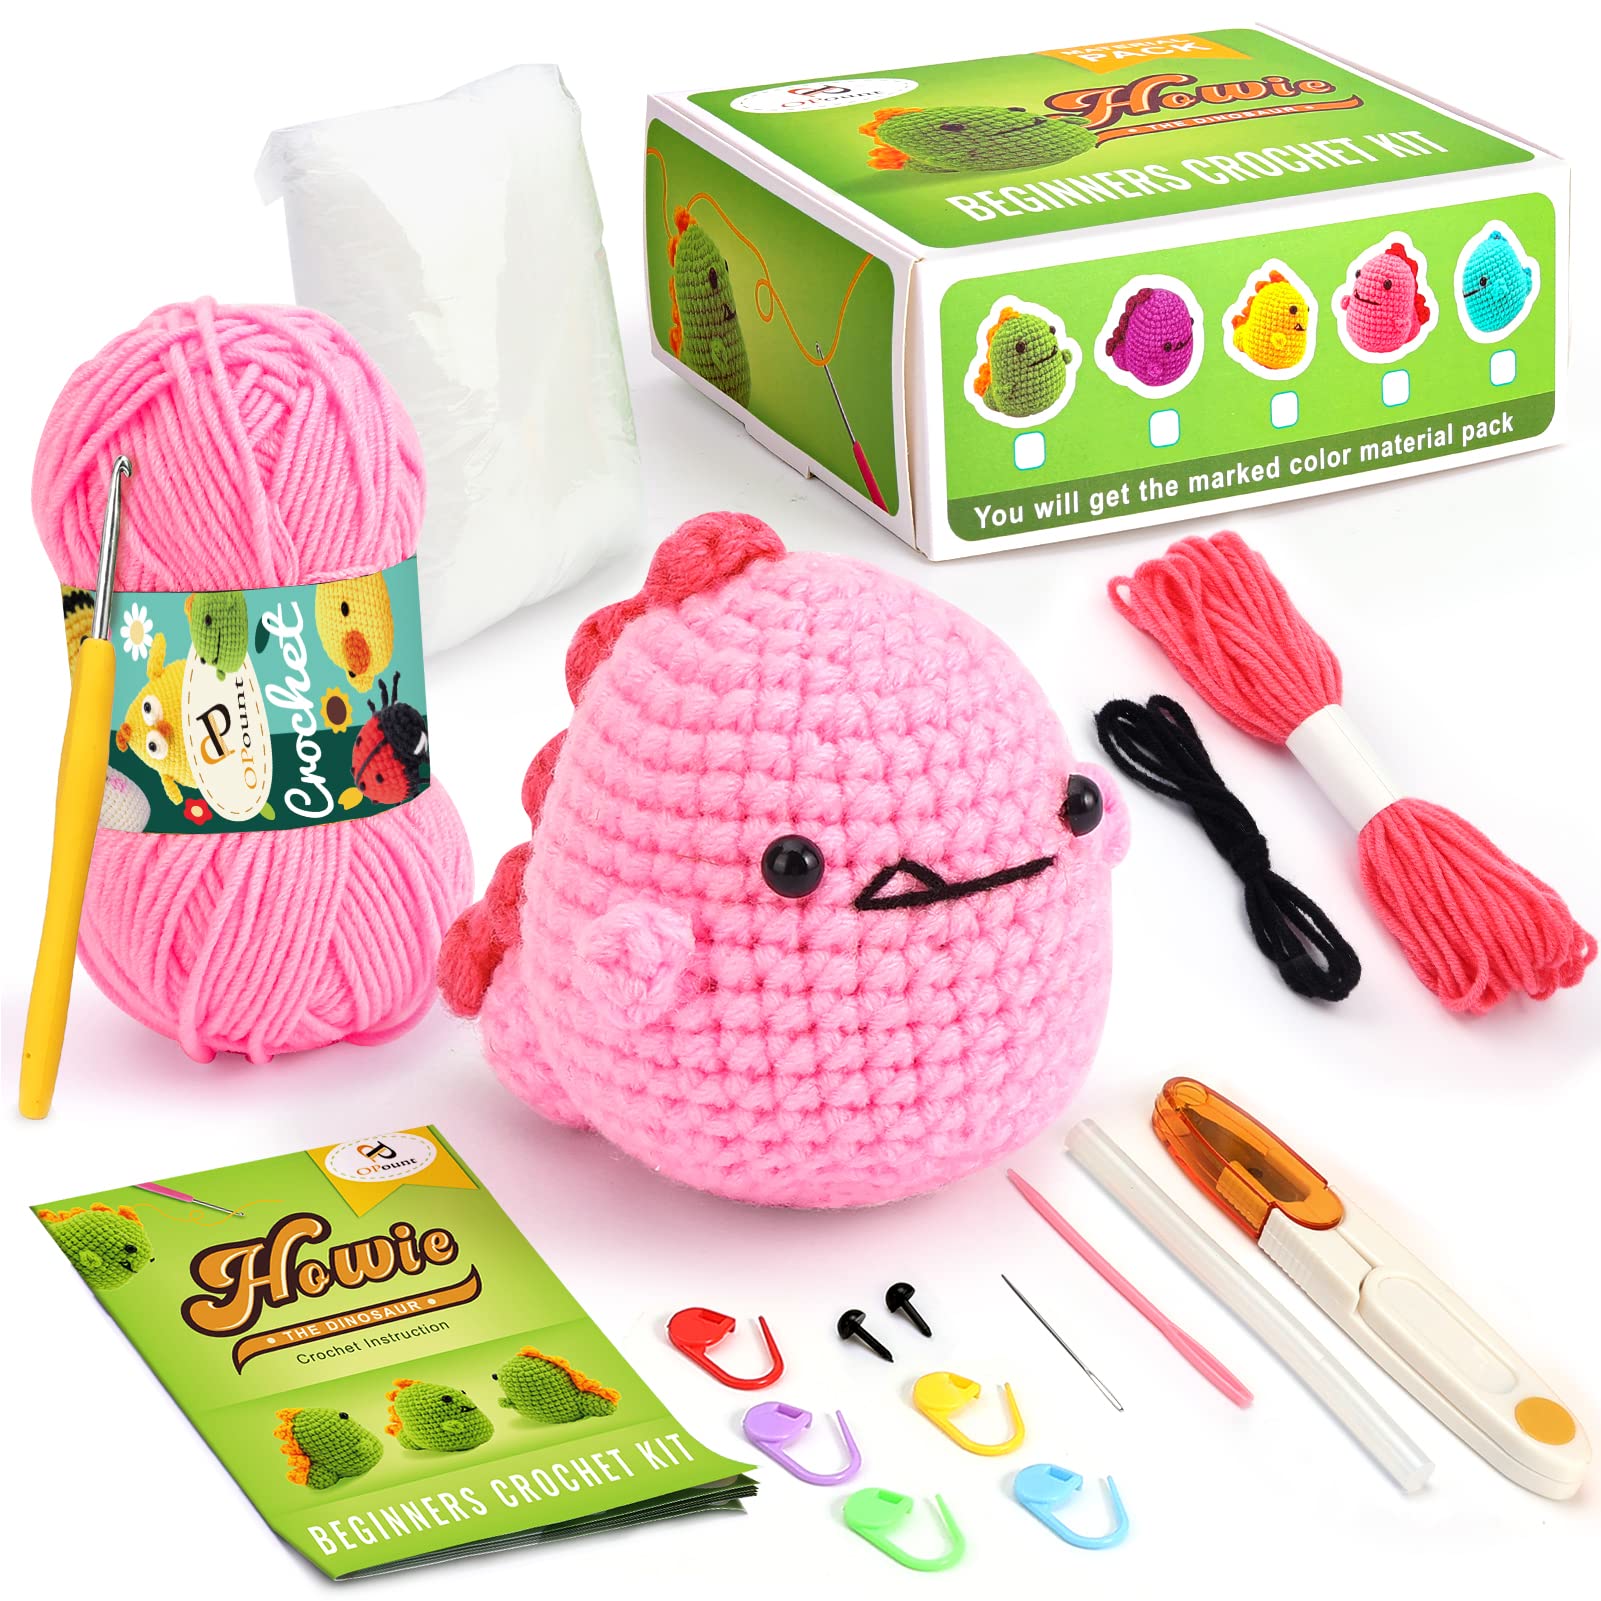 PP OPOUNT Beginner Crochet Kit, Crochet Starter Kit for Adults and Kids,  Complete Crochet Set to Make 4 PCS Animals, Learn to Crochet with  Step-by-Step Instruction and Video Tutorial (Patent Product)